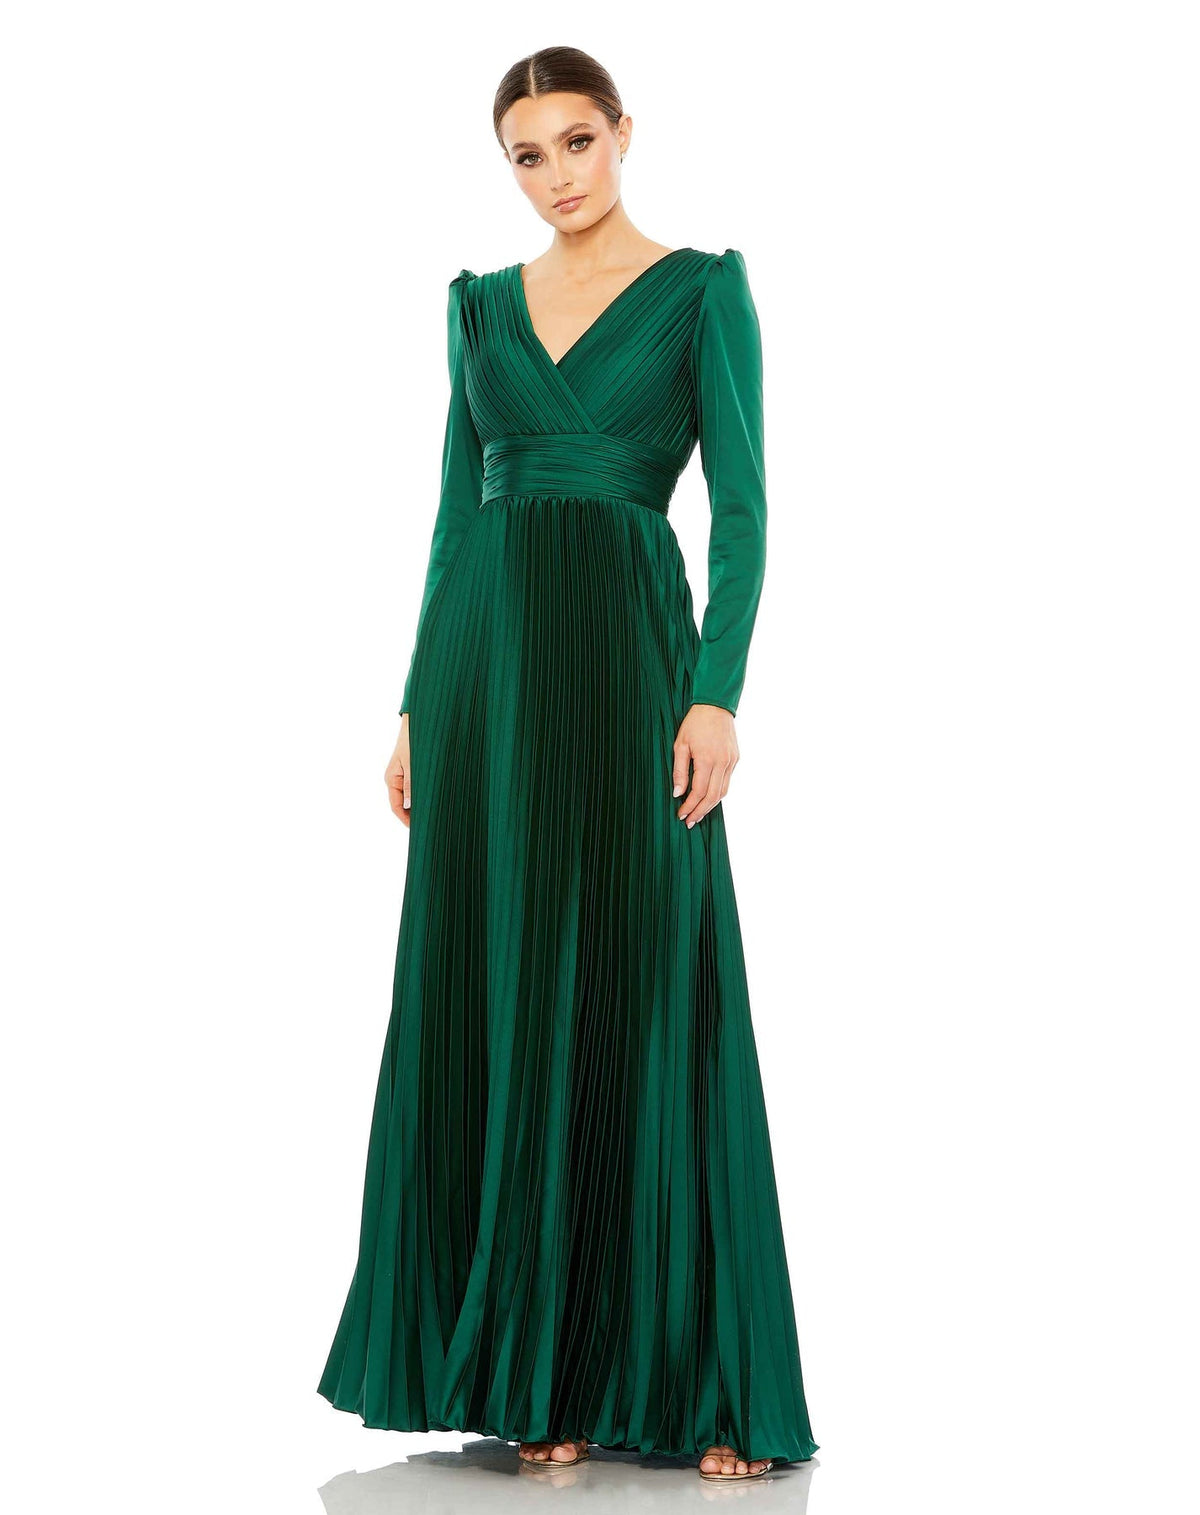 Mac Duggal, PLEATED LONG SLEEVE V-NECK GOWN modest gown, Style #26542  emerald green